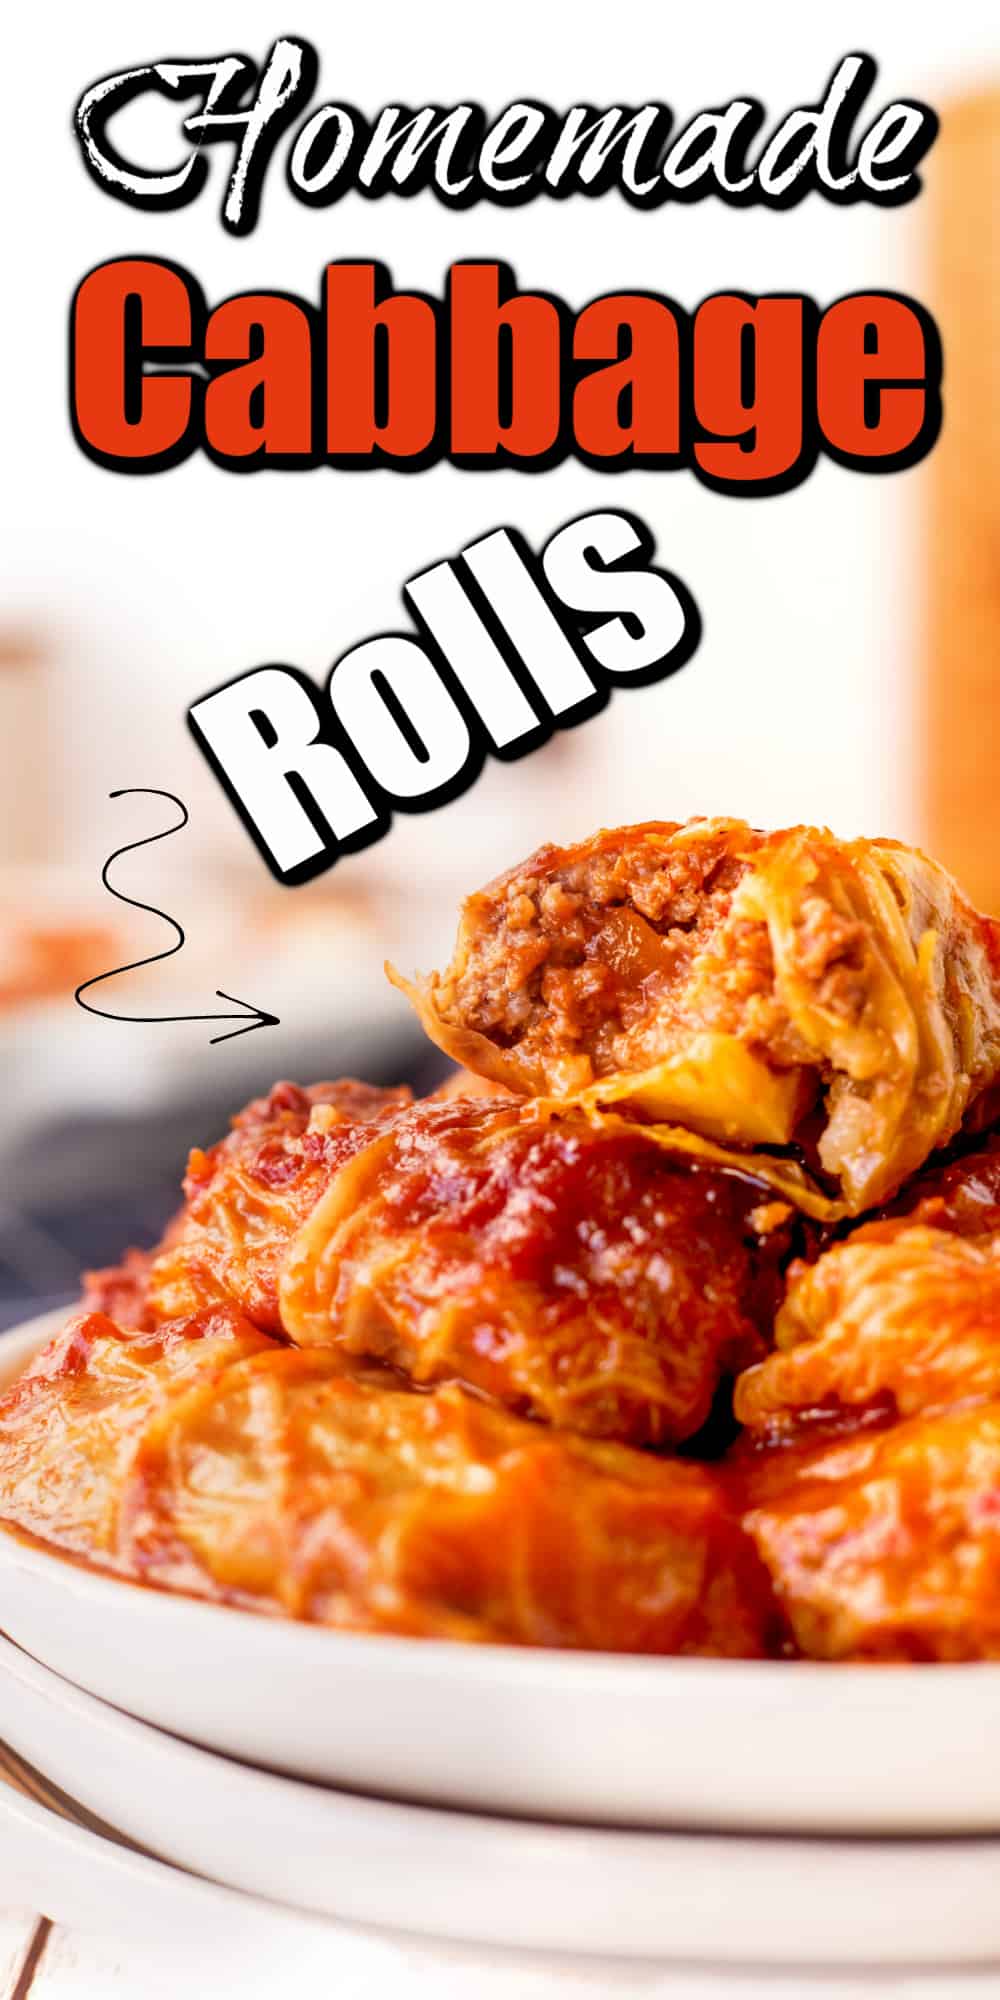 Cabbage Rolls - Simply The Best! Pin